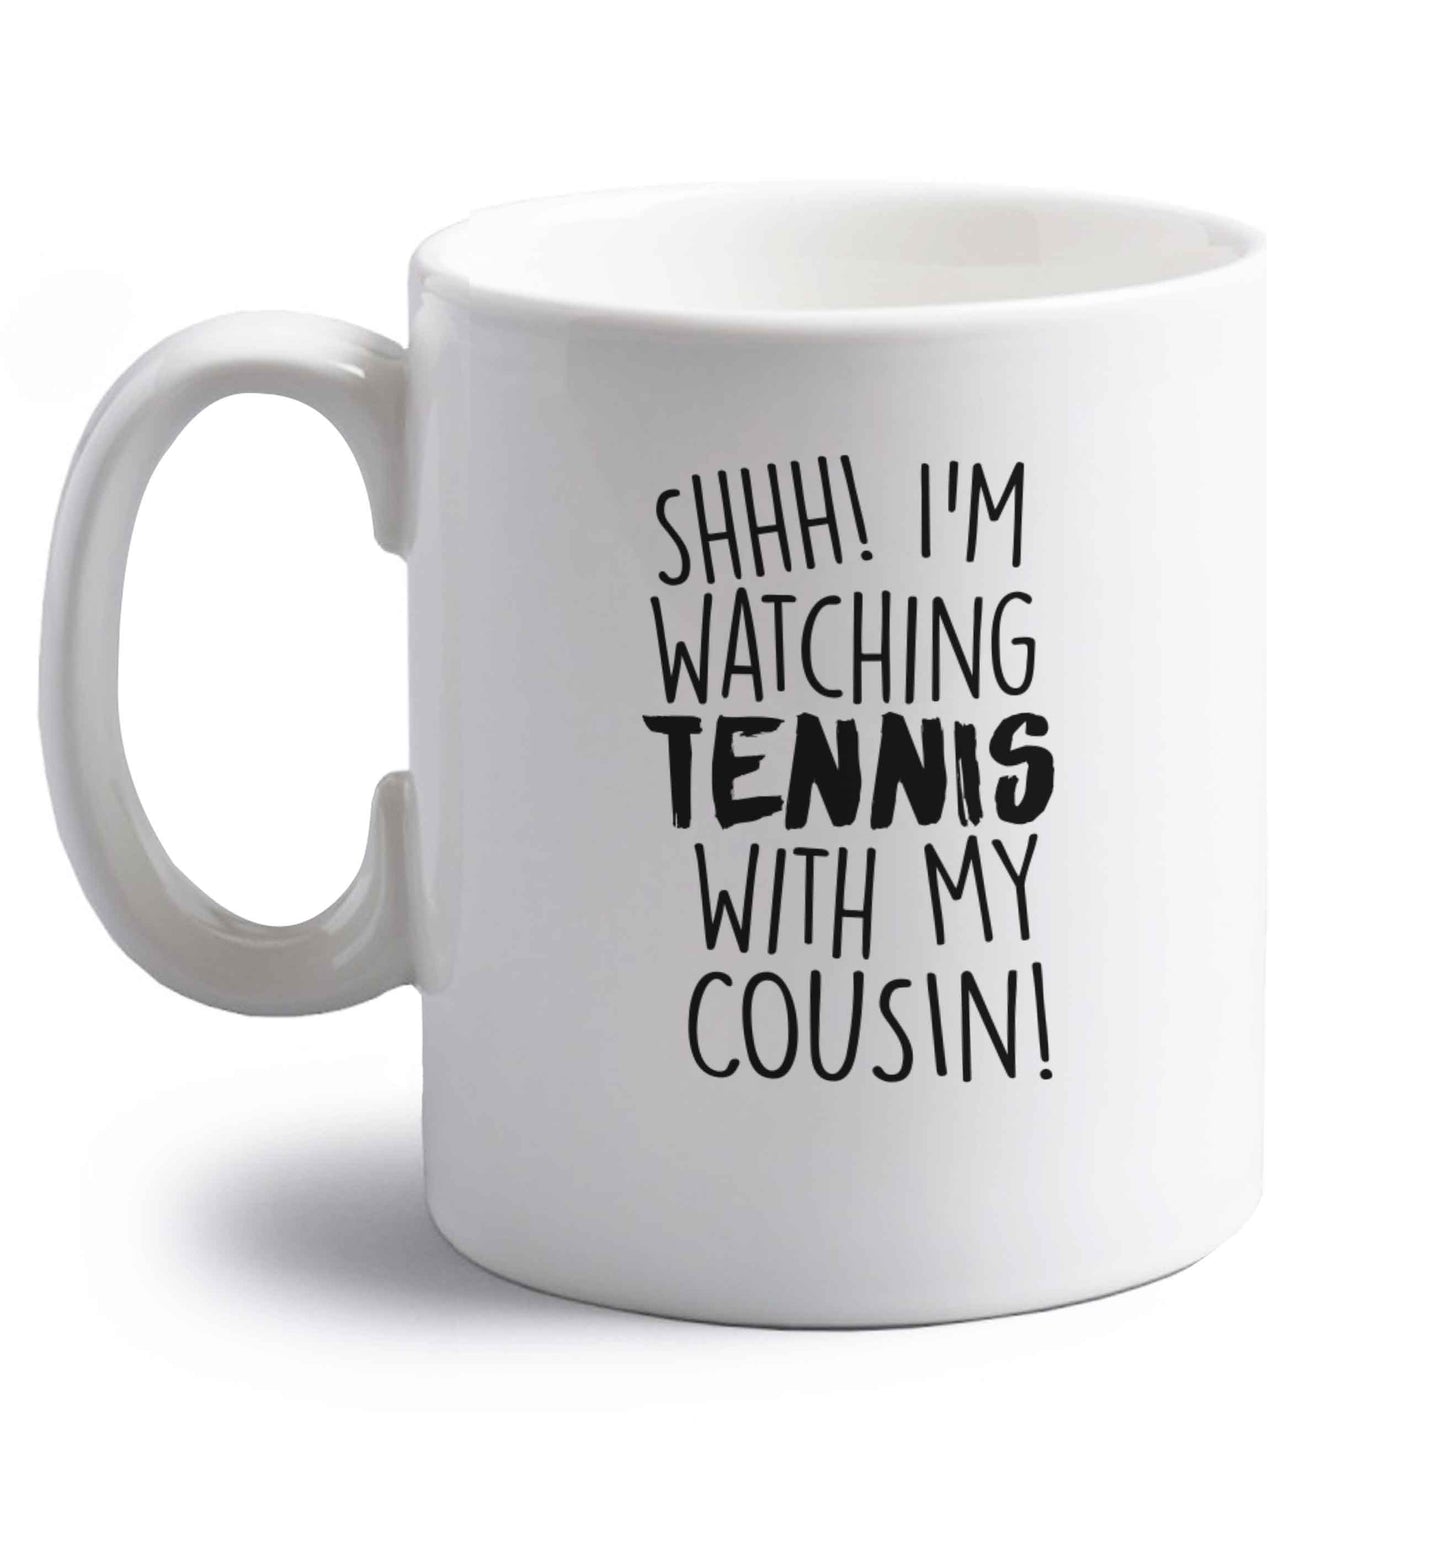 Shh! I'm watching tennis with my cousin! right handed white ceramic mug 